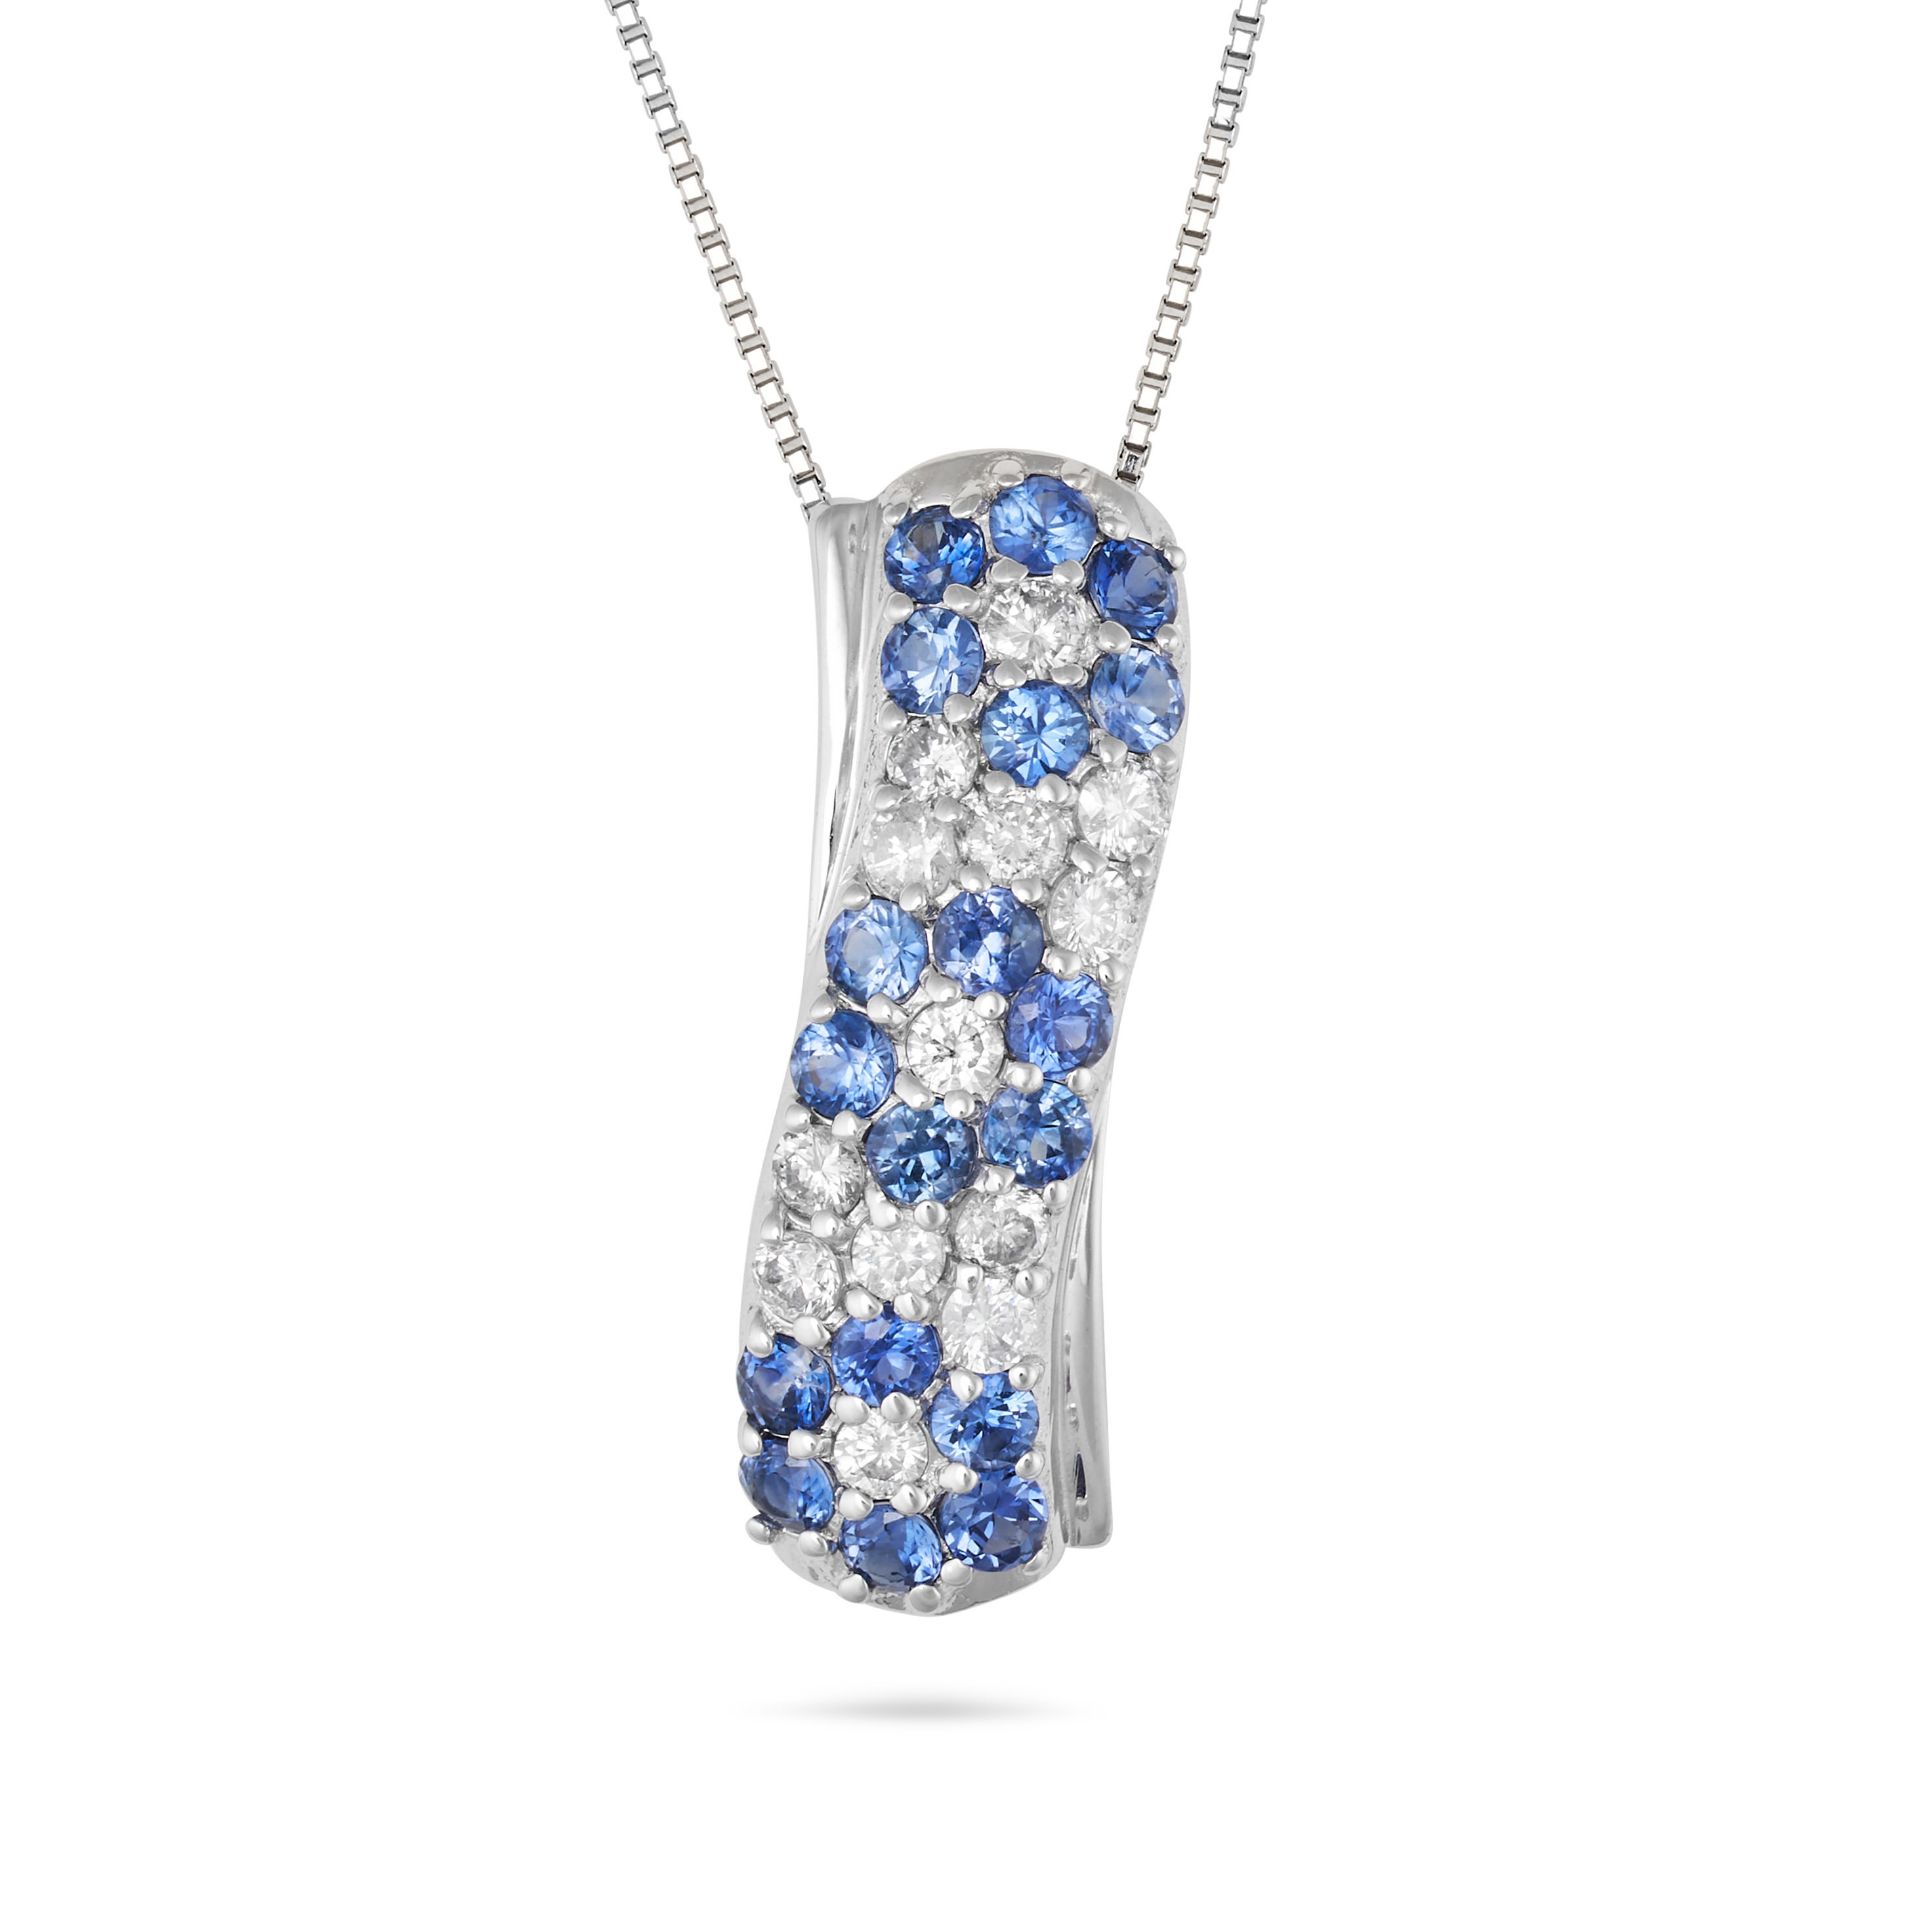 A SAPPHIRE AND DIAMOND PENDANT NECKLACE in 18ct white gold, the pendant set with clusters of roun...